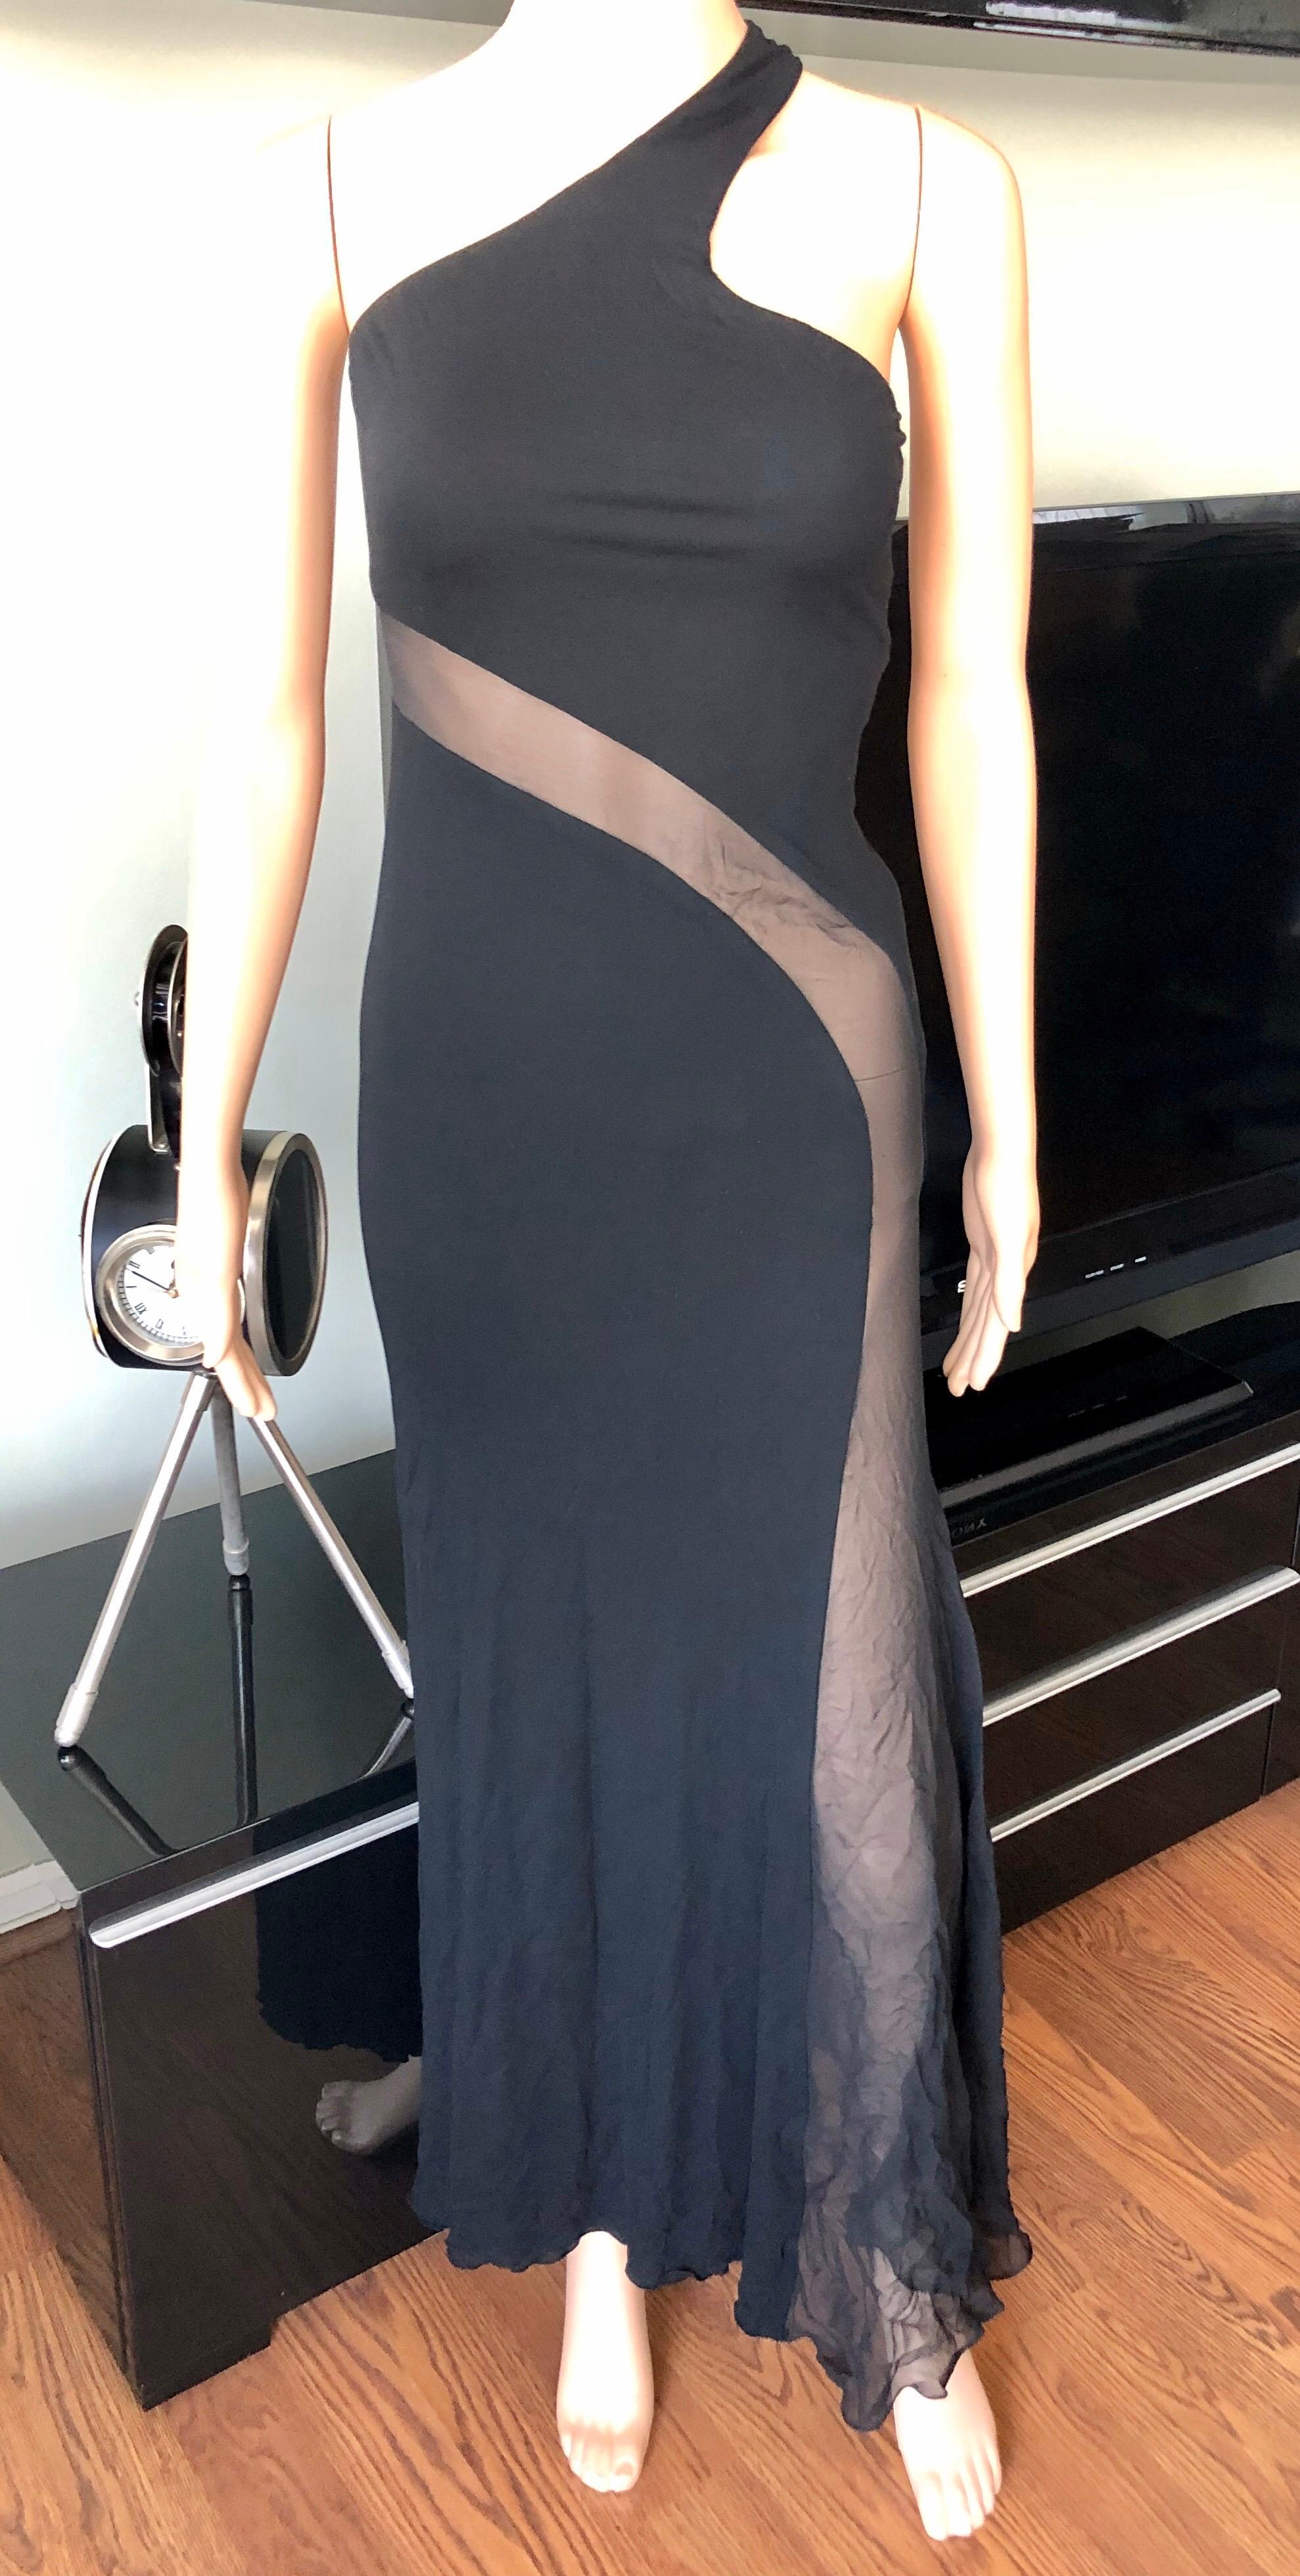 Versace Sheer Cutout Panel Black Evening Dress Gown IT 38

Versace black evening dress featuring sheer cutout panel, logo embellished closure at back and concealed zip closure at side.
